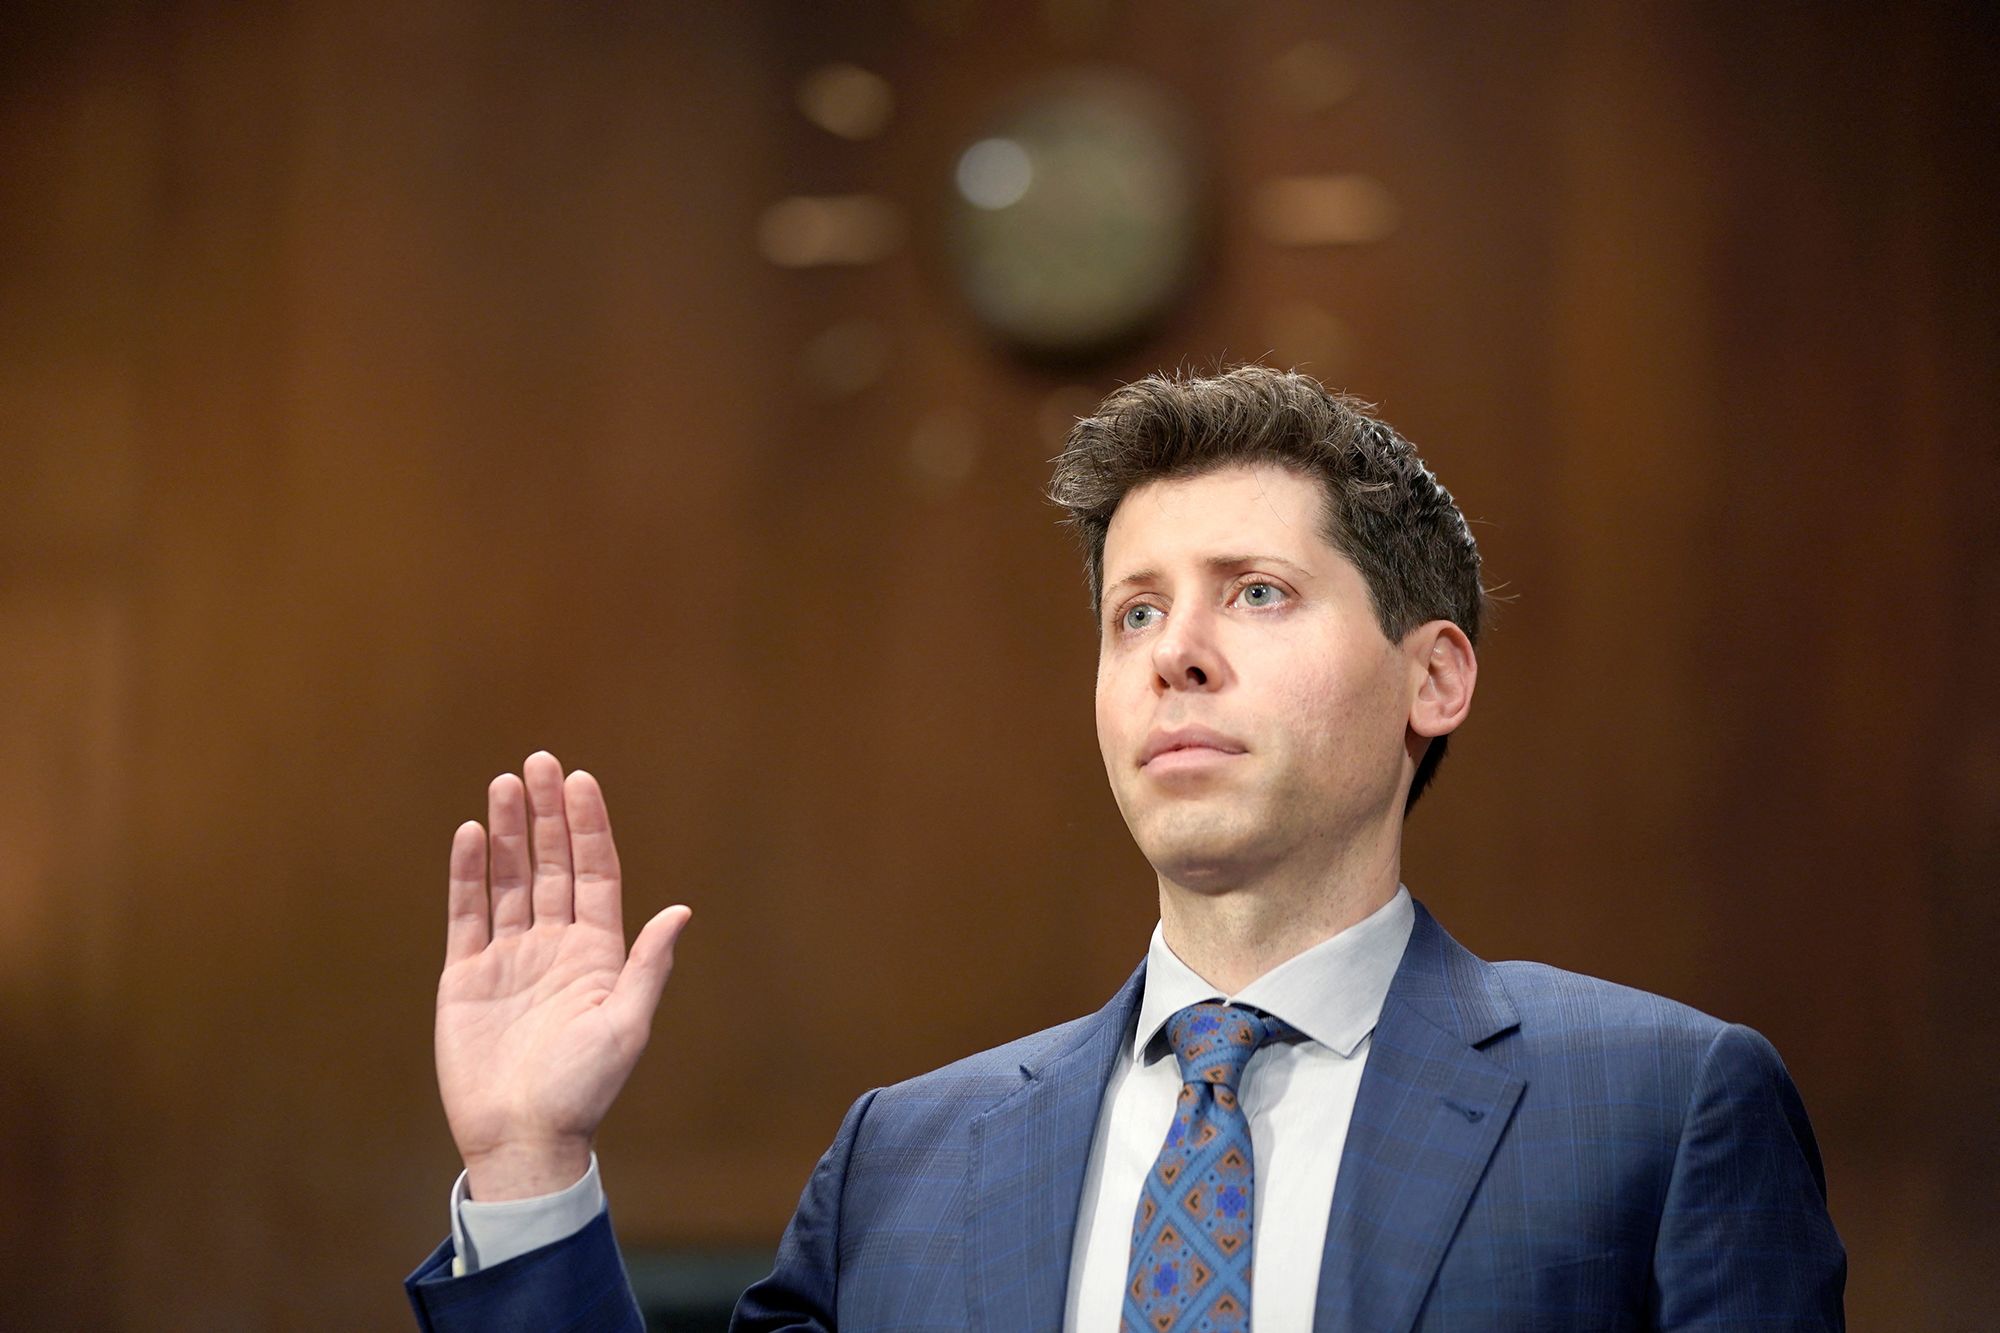 As the Investigation Into His Dismissal Comes to a Close, Sam Altman Has Been Reinstated to the OpenAI Board